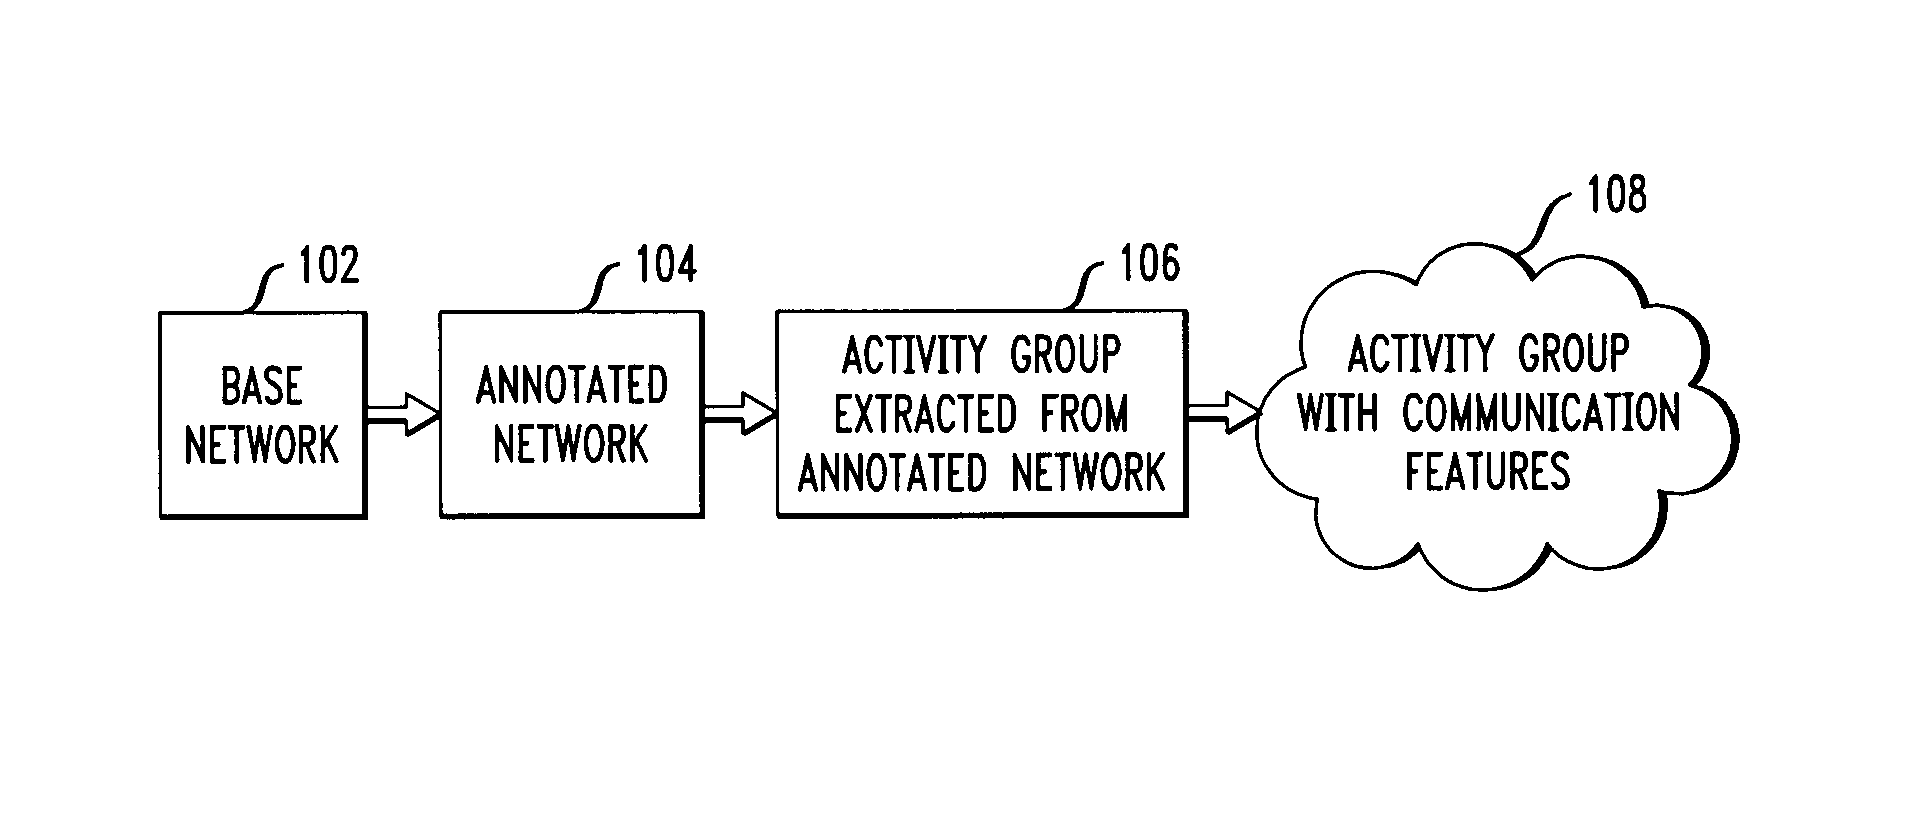 Forming dynamic real-time activity groups